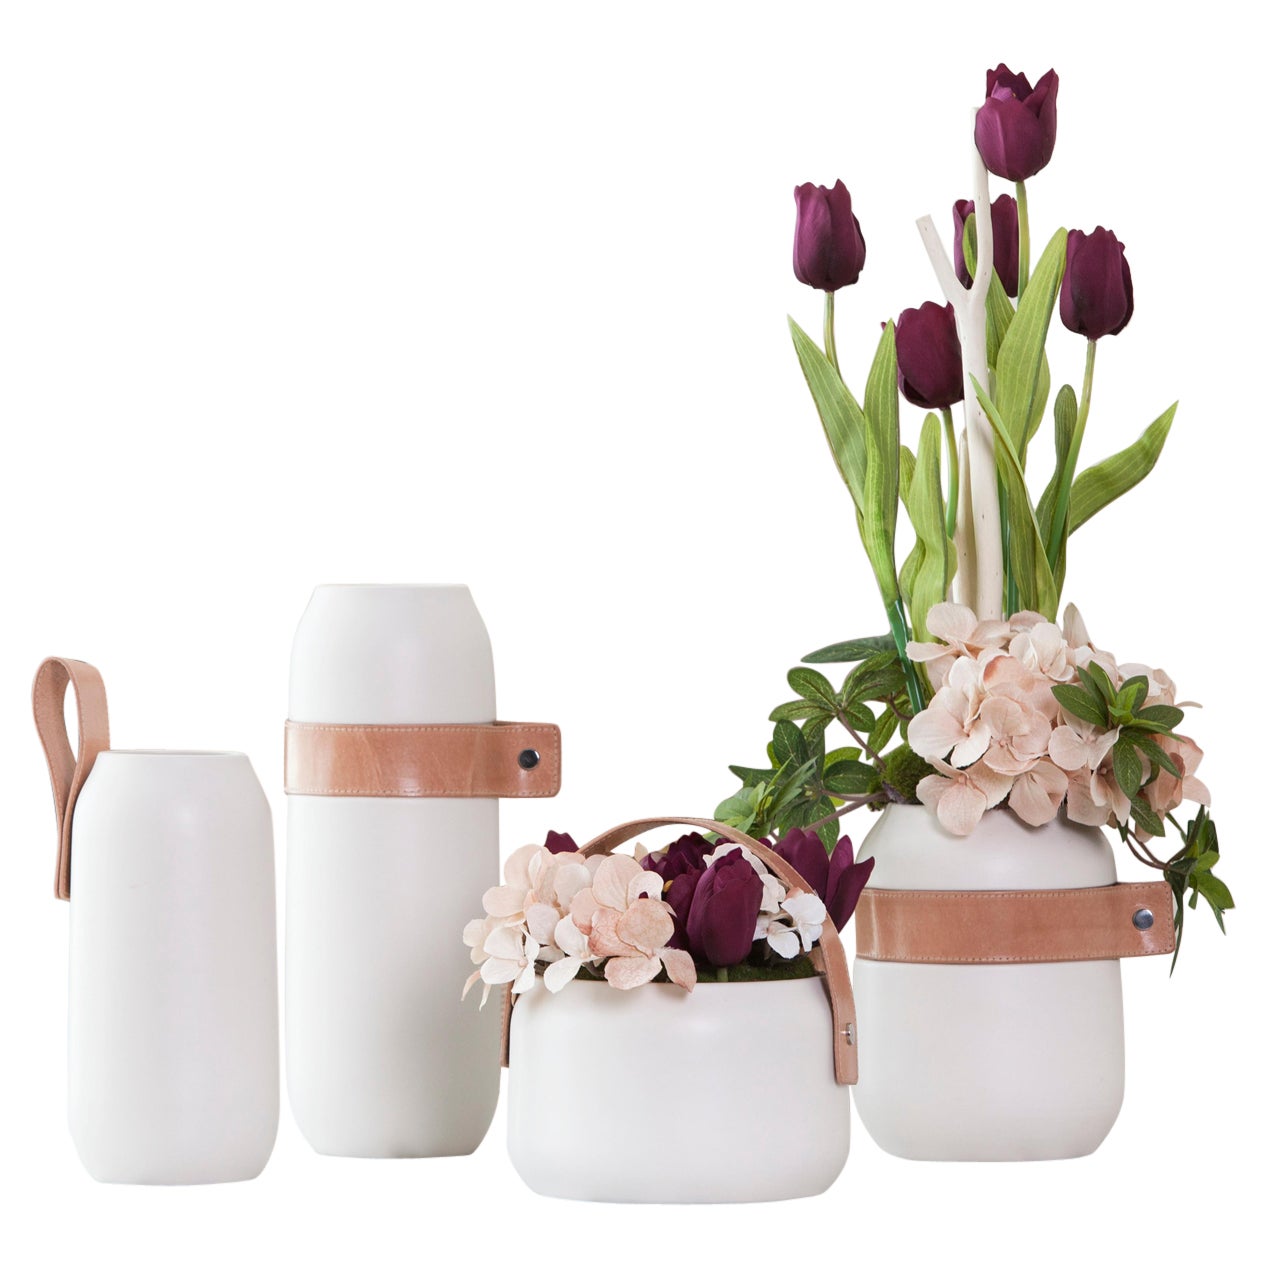 Modern Set/4 Ceramic Vases w/ Leather, White, Handmade in Portugal by Lusitanus Home For Sale